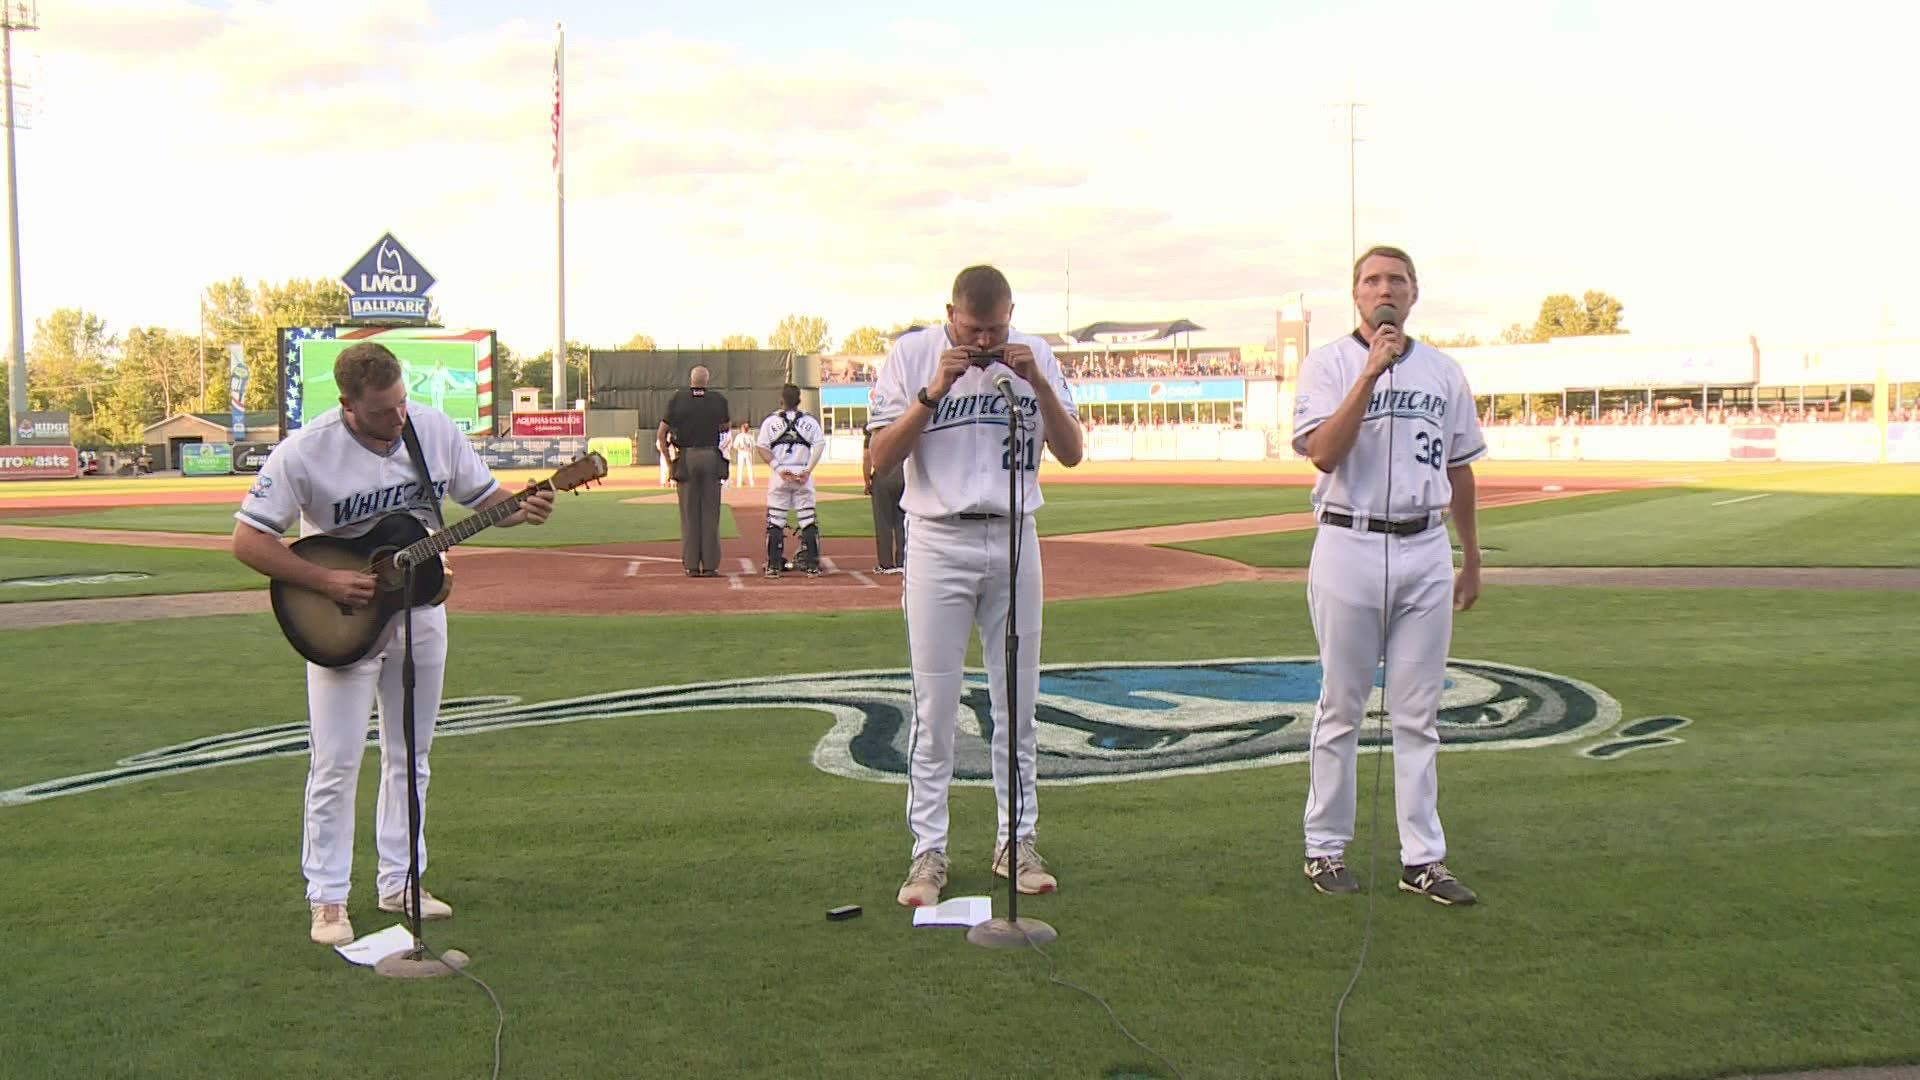 Mike Lacett chimes in on the three Whitecaps players performing the national anthem at Wednesday’s game.